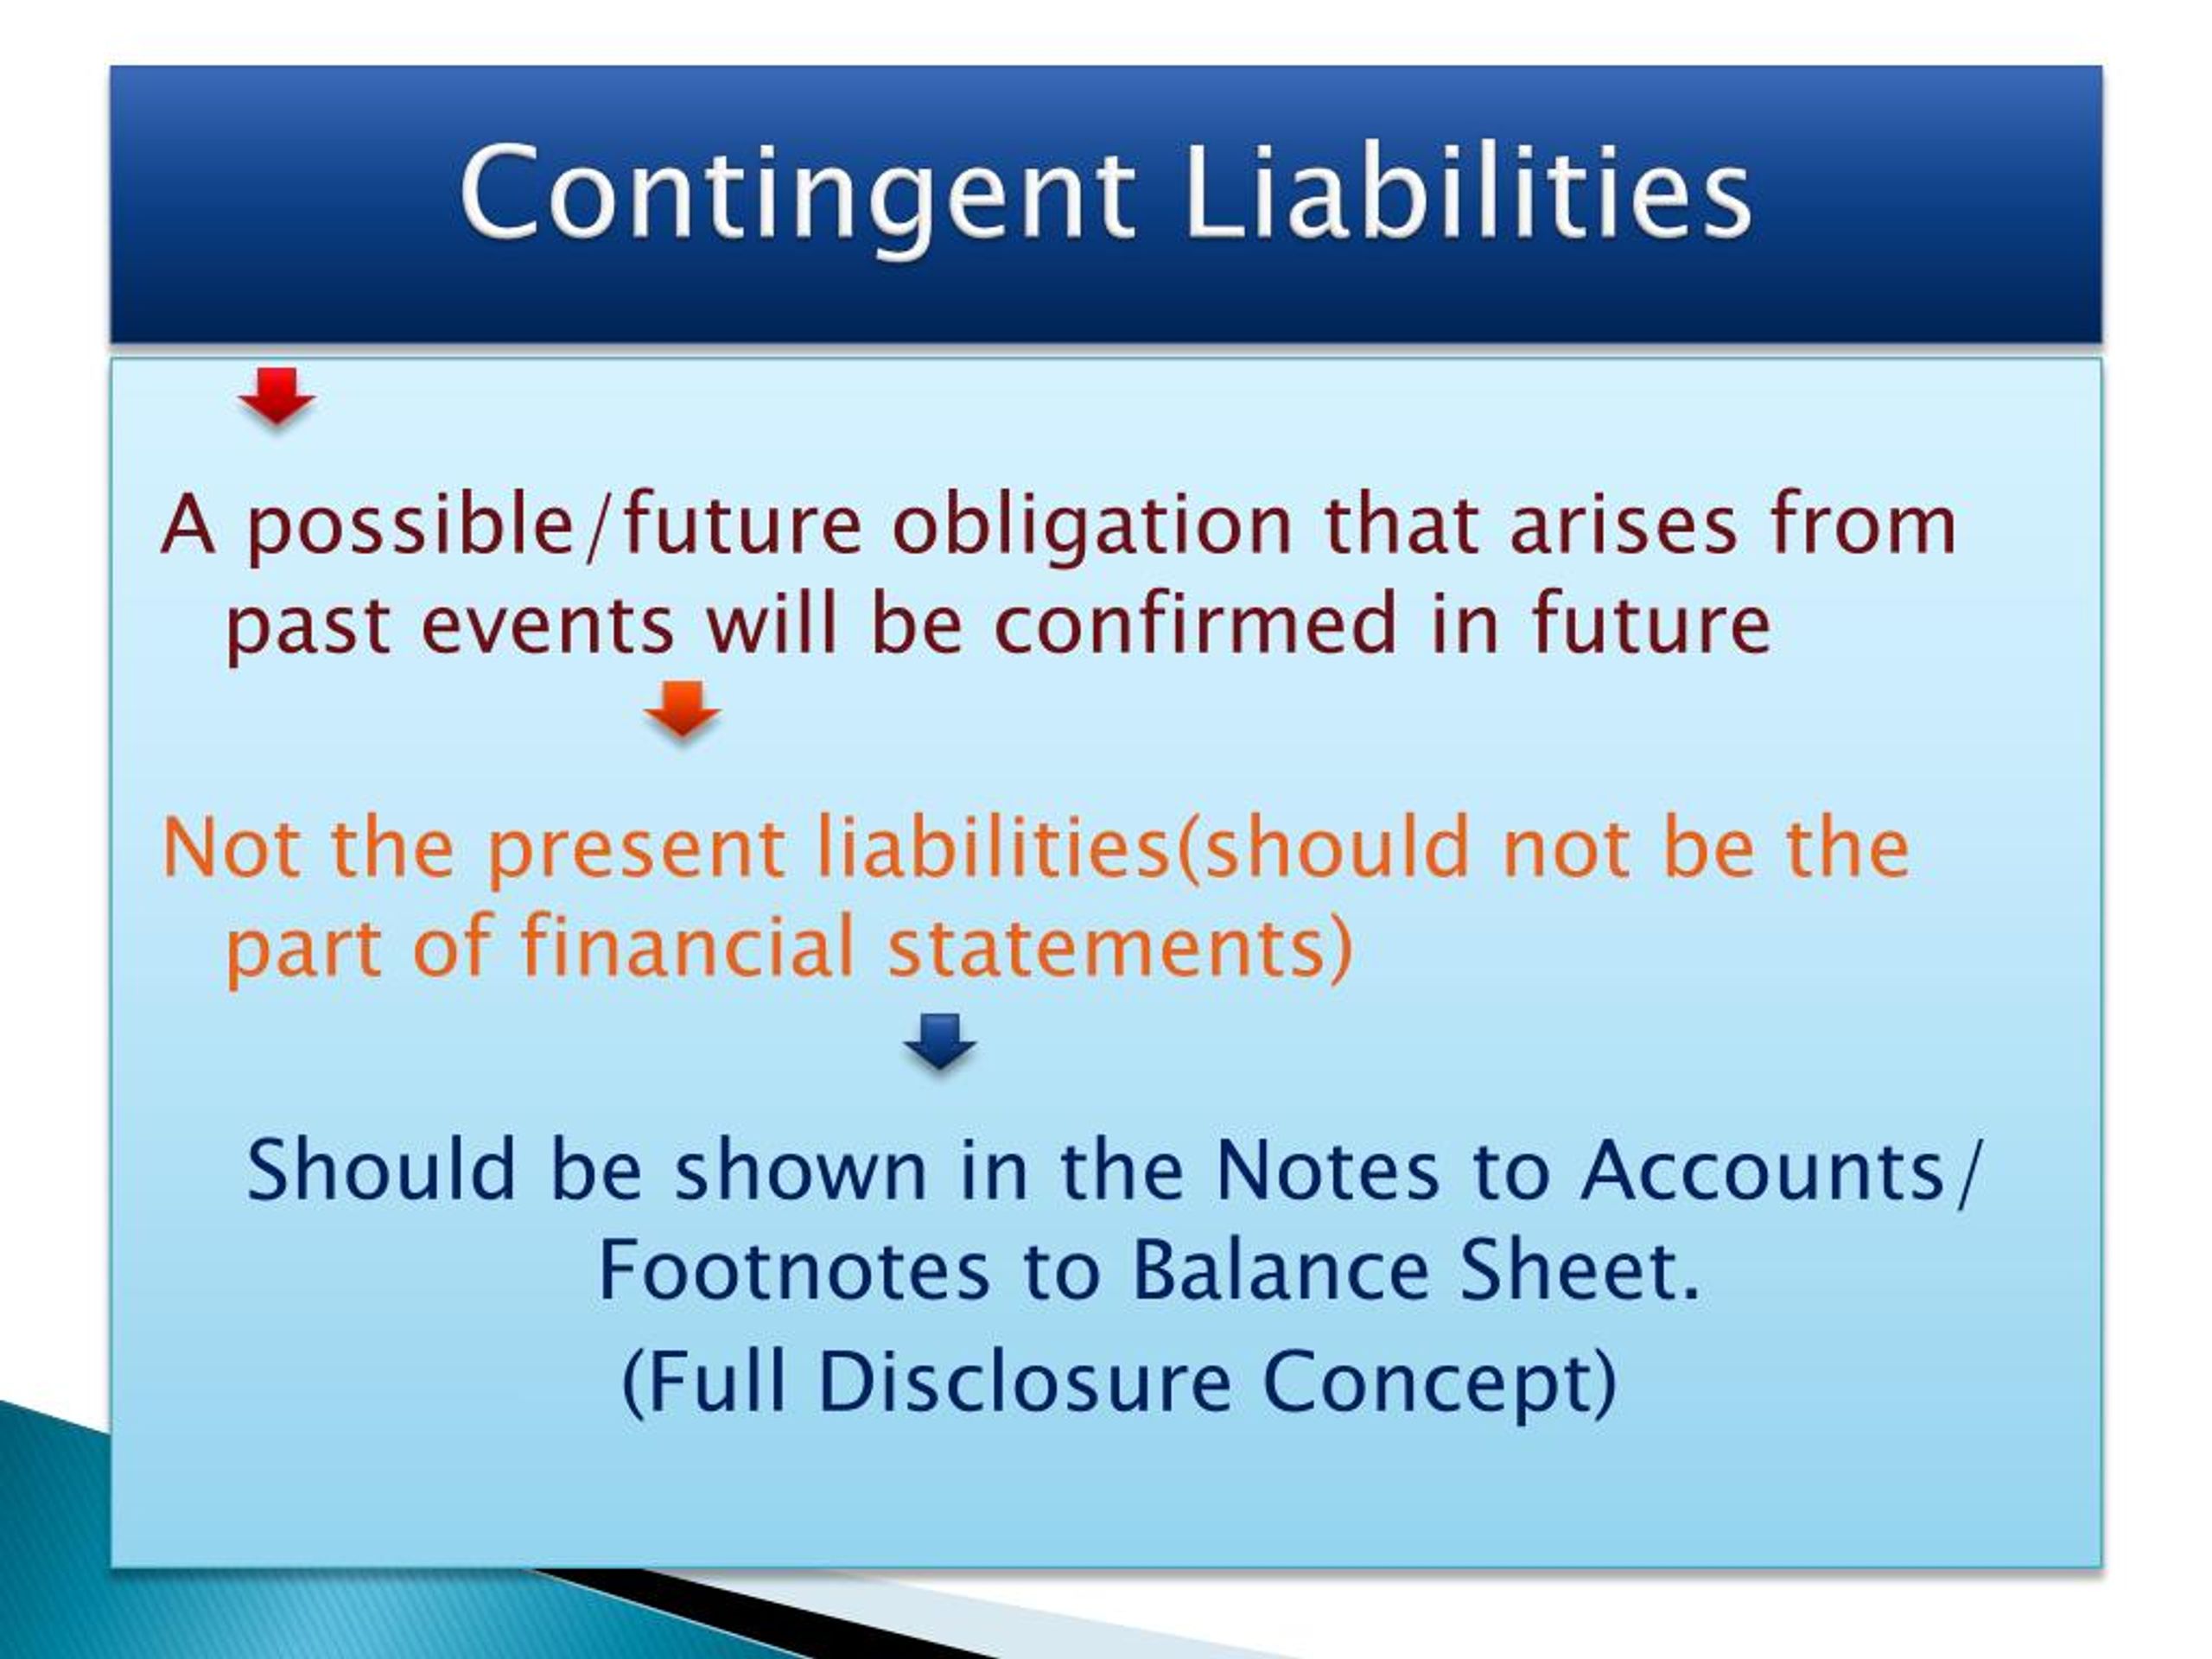 presentation of contingent liabilities in balance sheet